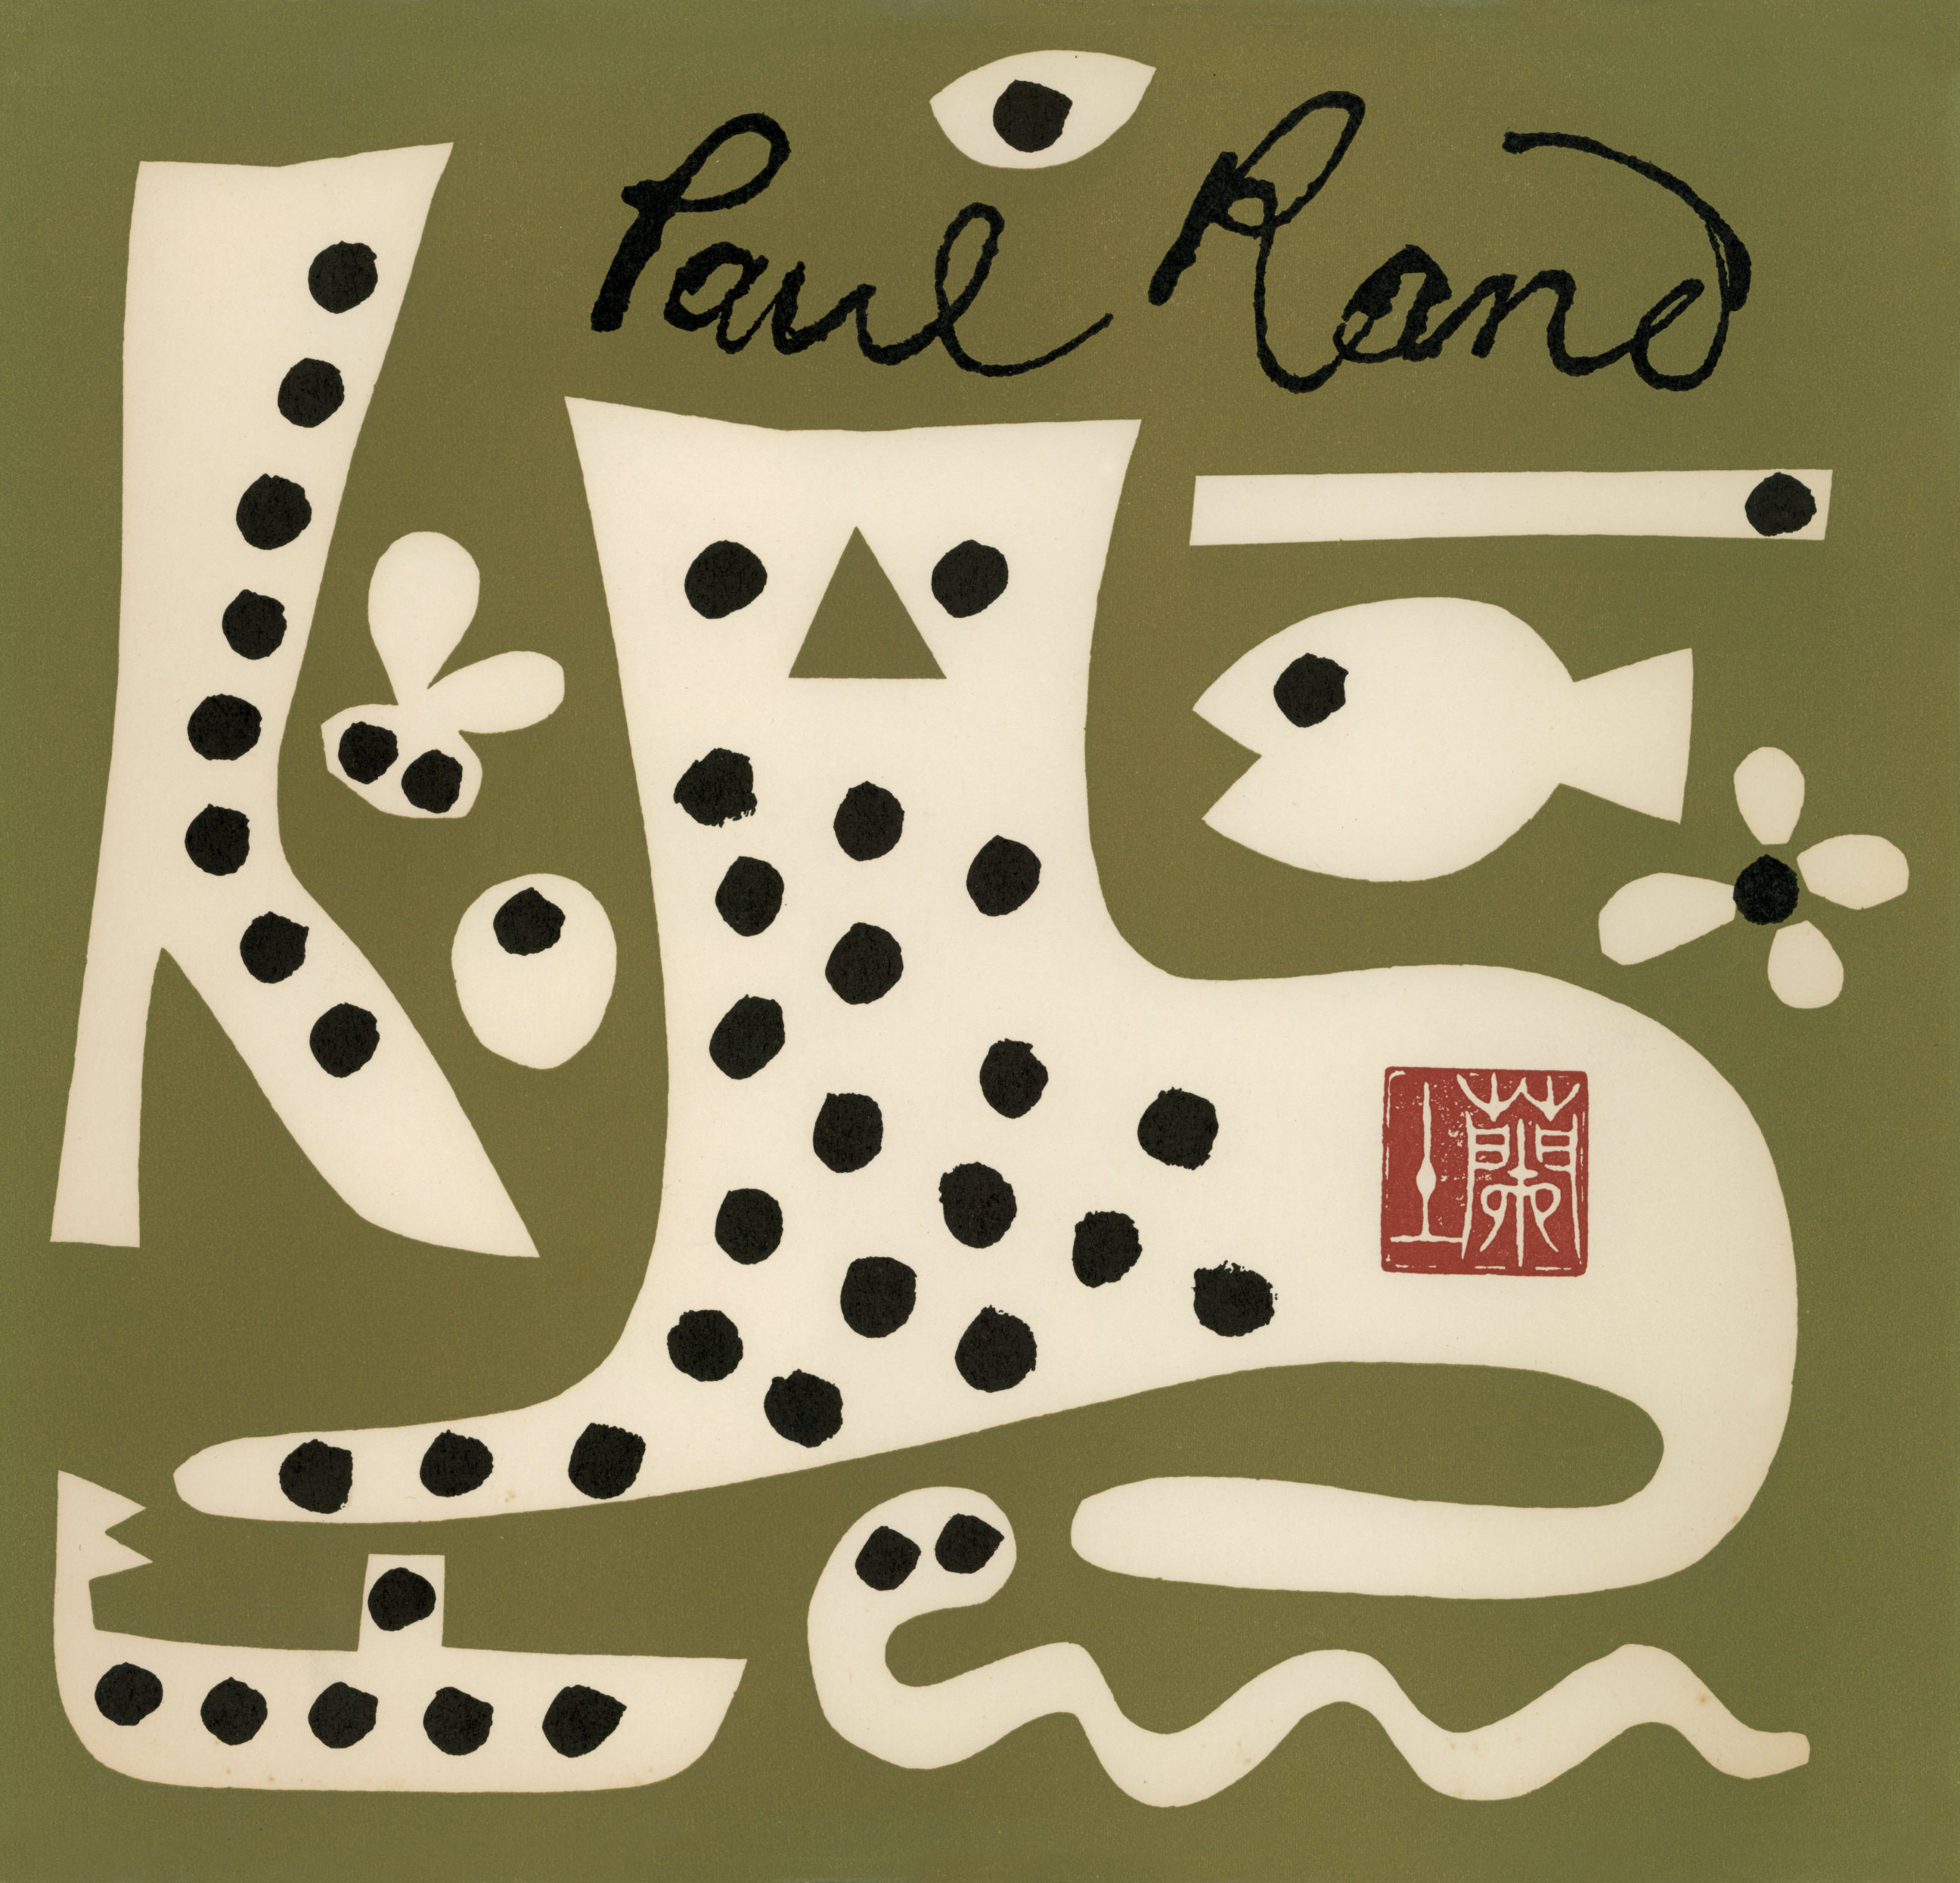 Paul Rand: His Works from 1946-1958 | Paul Rand: Modernist Master 1914-19962592 x 2490